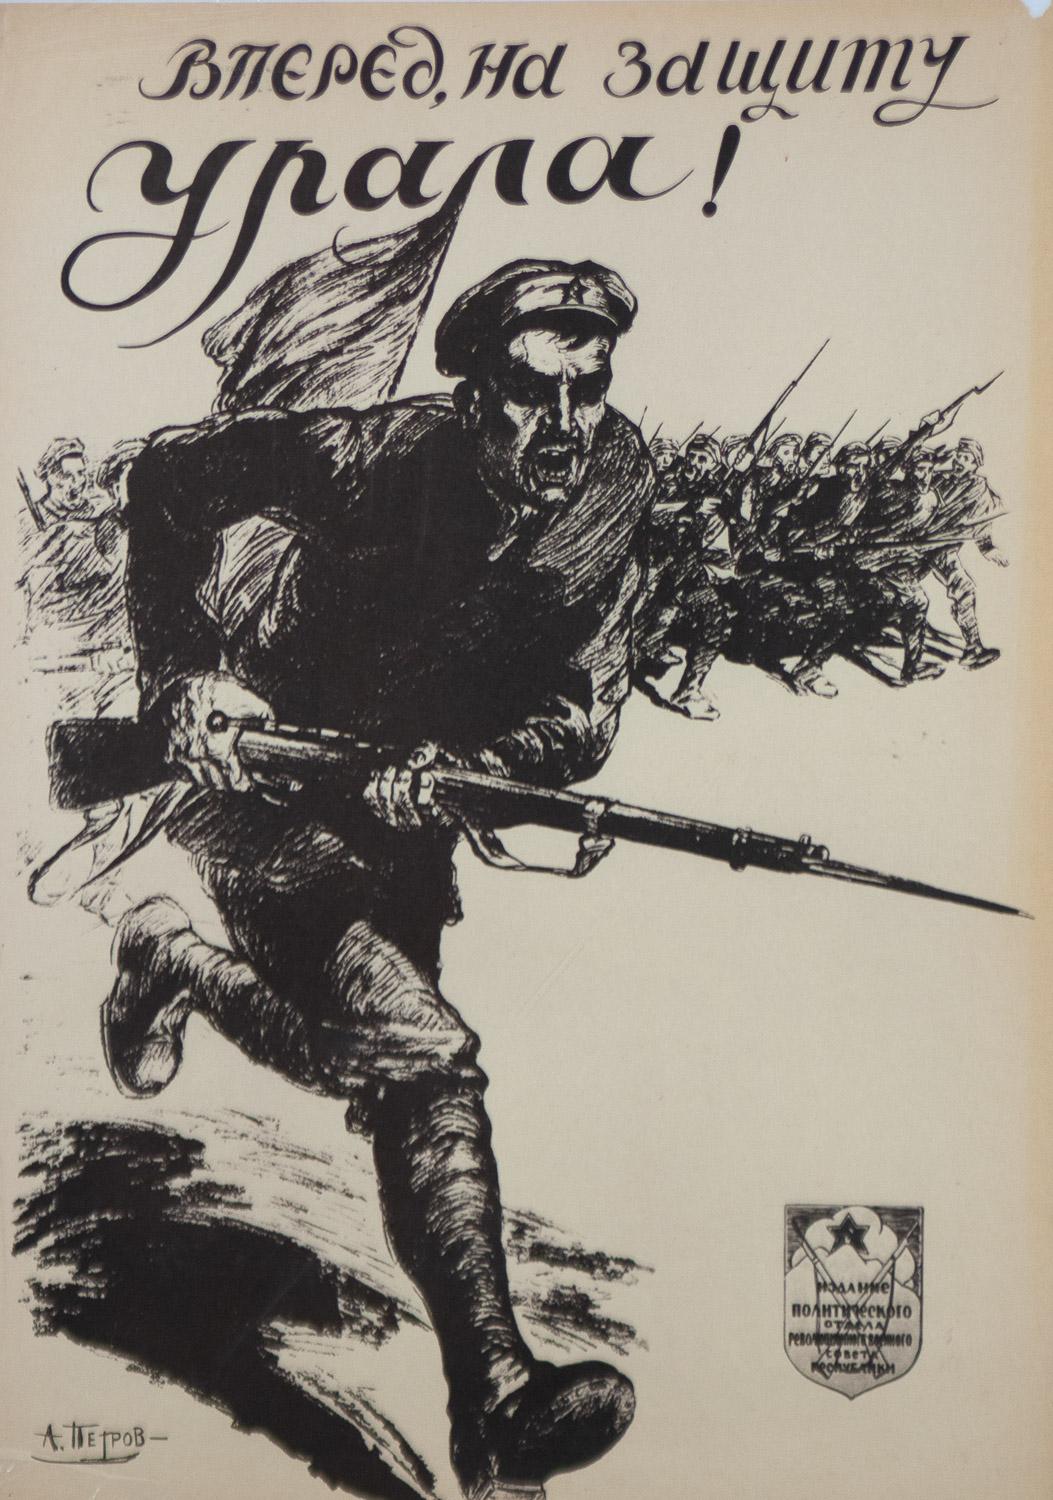 The Bolshevik Era (1917-1921) was a life and death struggle for the Bolsheviks and their ideology. The propaganda poster was everywhere, as the Bolsheviks struggled to win the Civil War against the Whites and fought the Poles over control of the